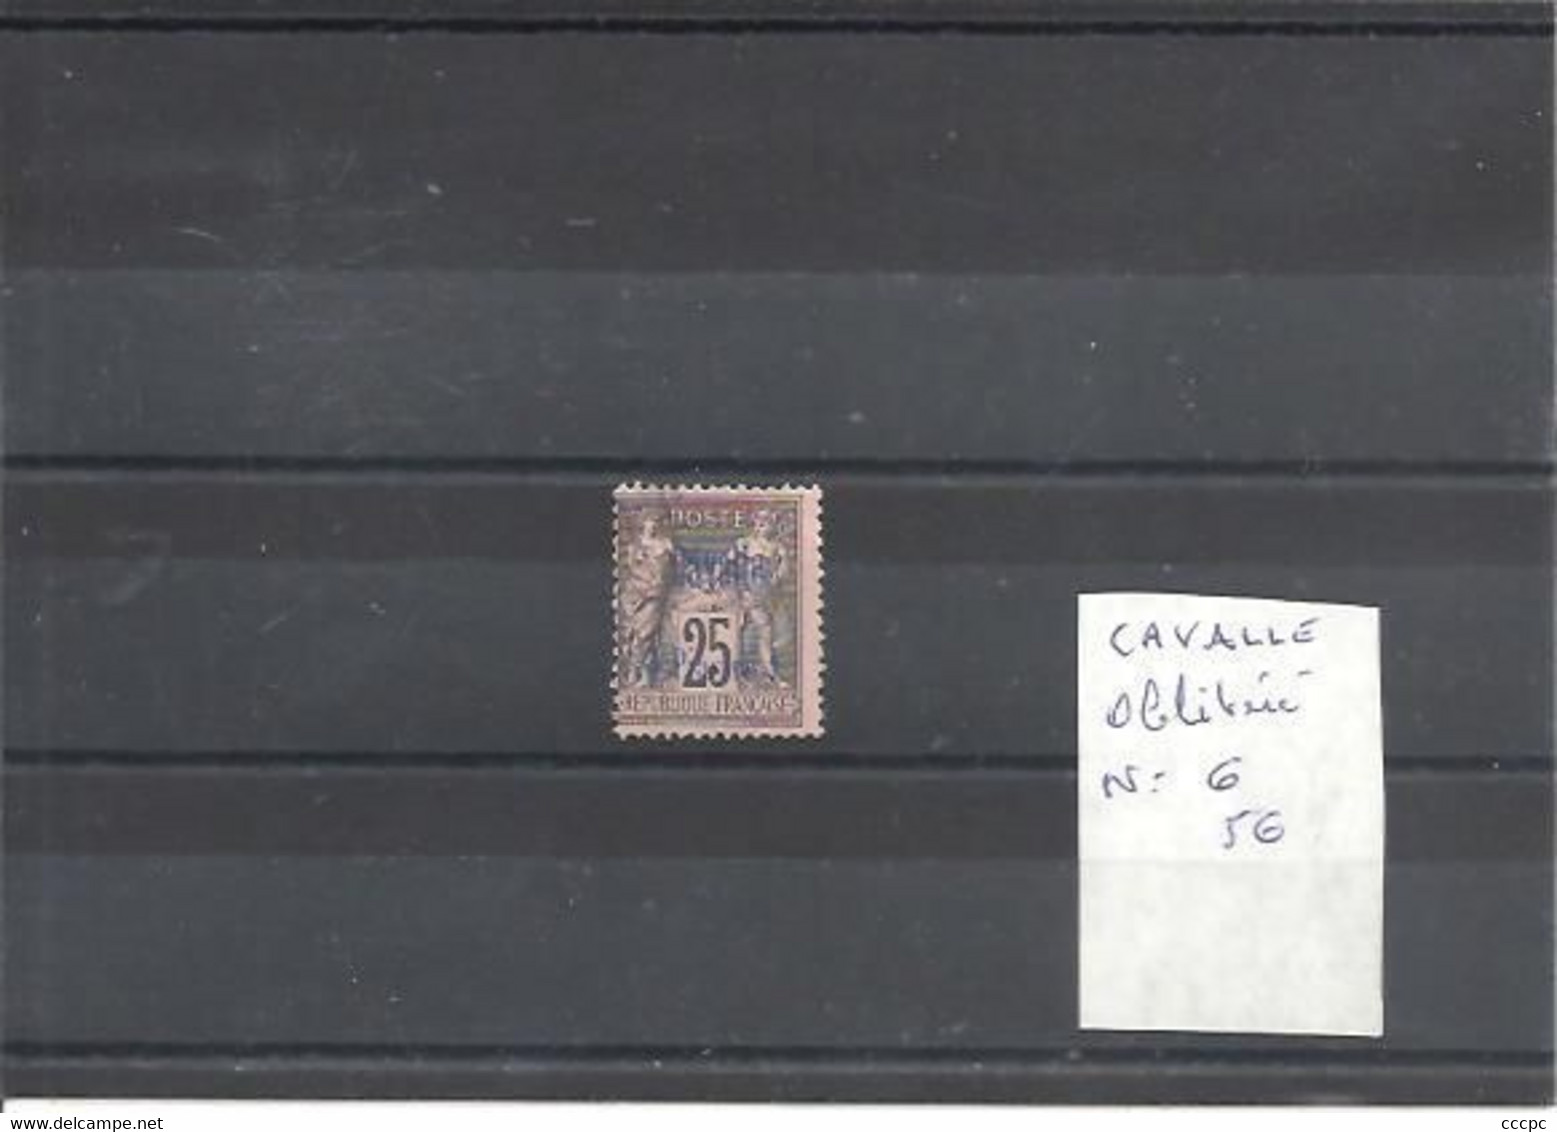 Cavalle Oblité N°6 - Used Stamps